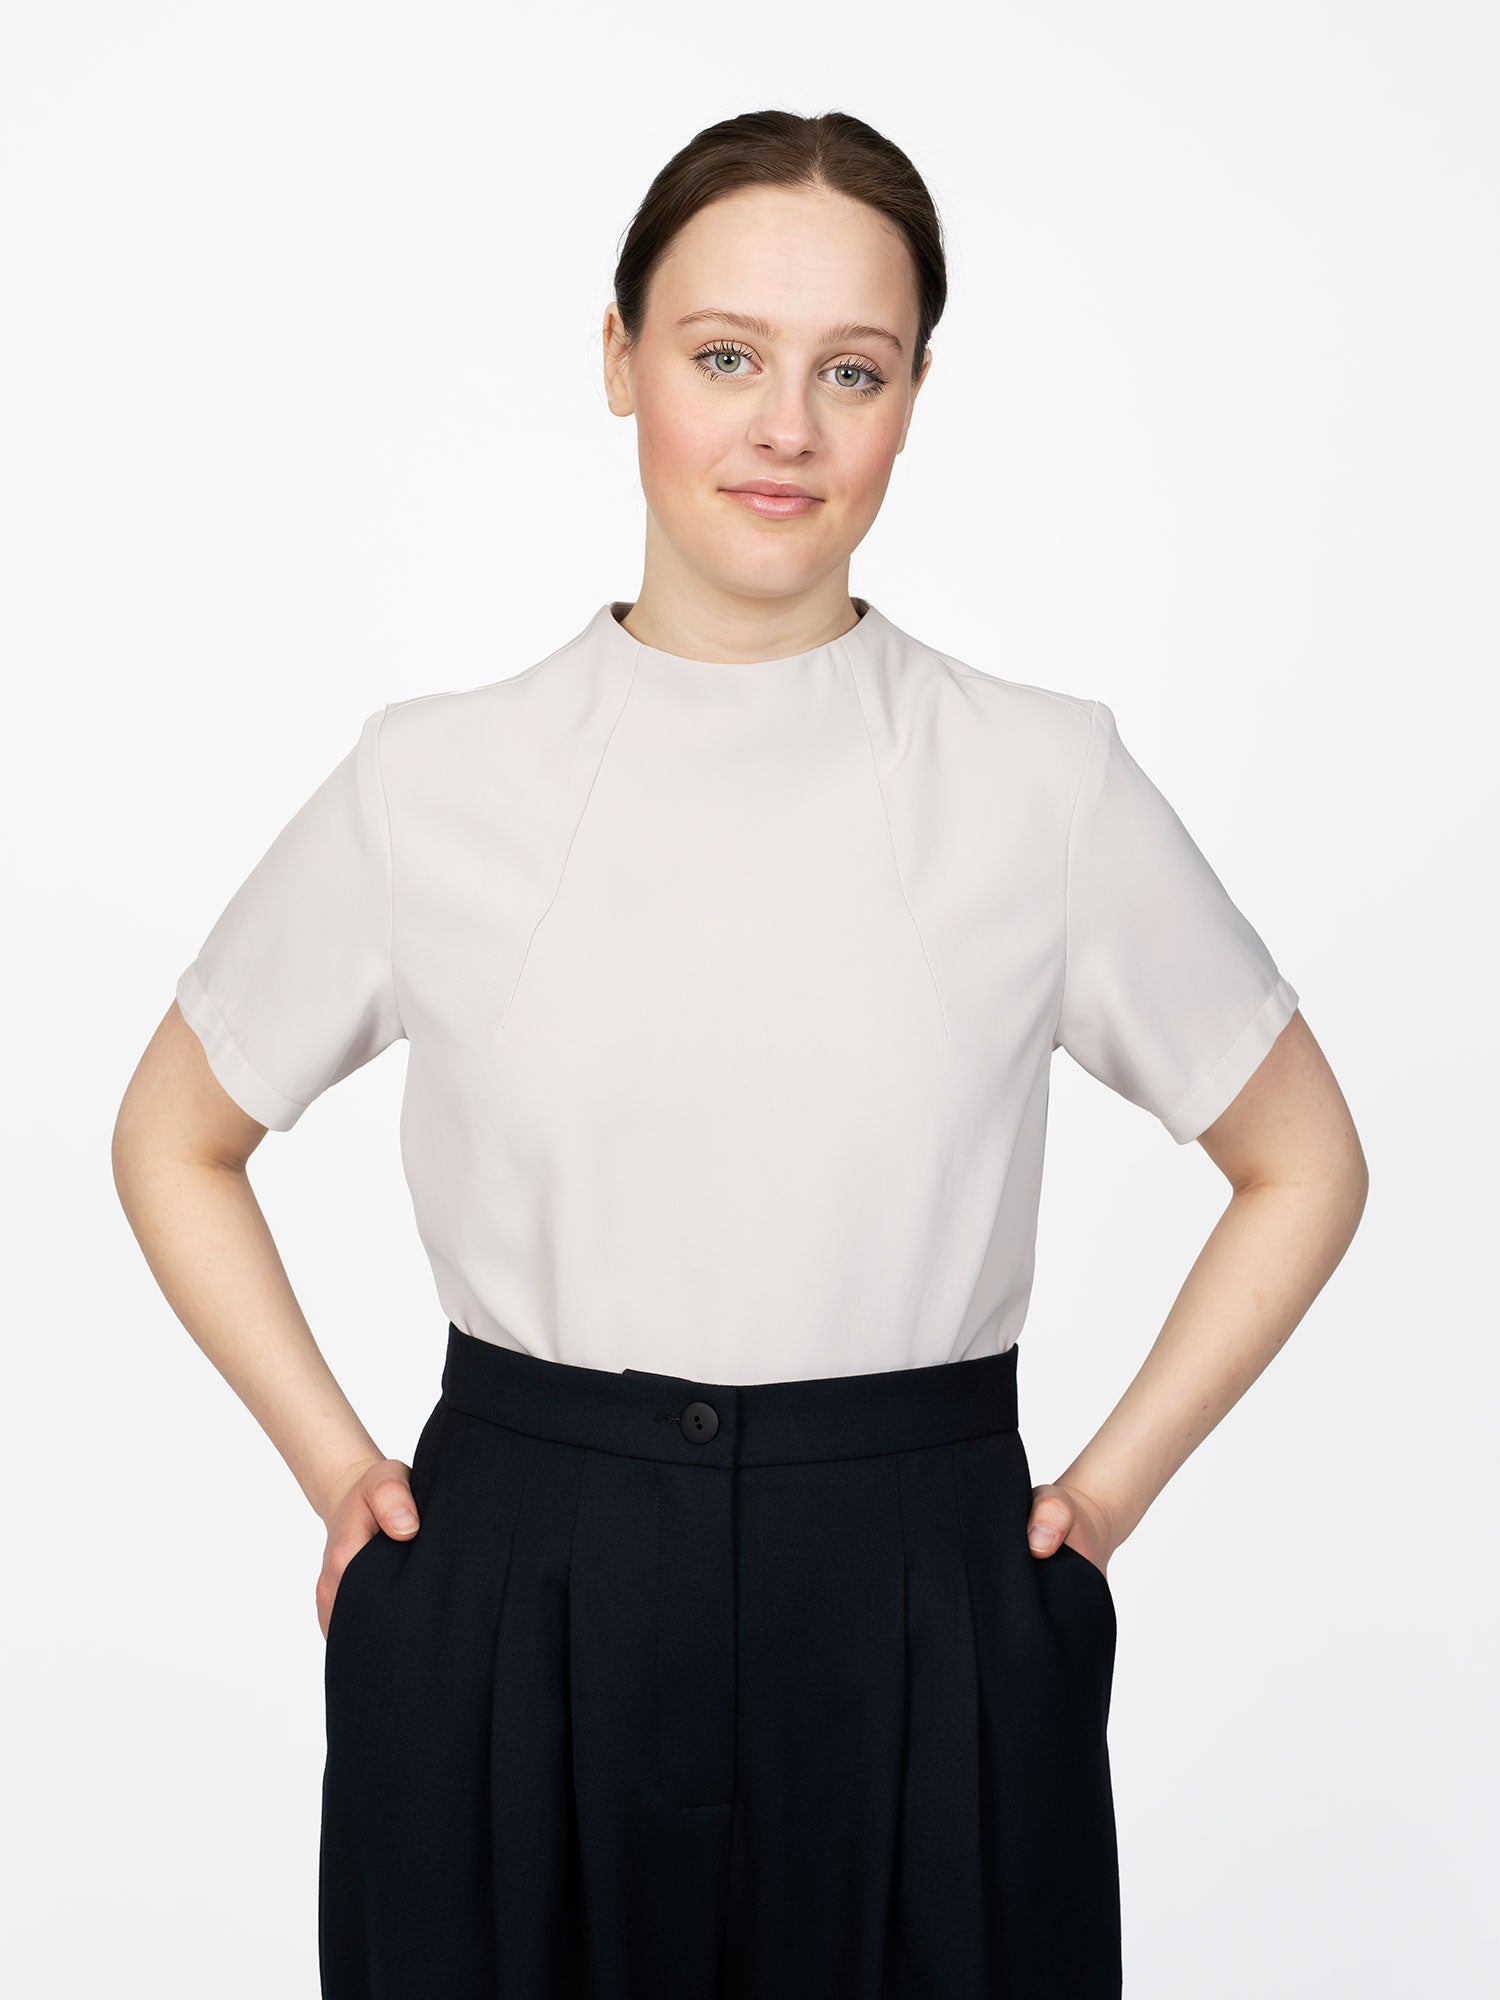 Woman wearing the Funnel Neck Top sewing pattern from The Assembly Line on The Fold Line. A top pattern made in cotton, silk, lawn, linen, crepe de chine or wool crepe fabrics, featuring elbow-length sleeves, raised neckline with front neck darts and back